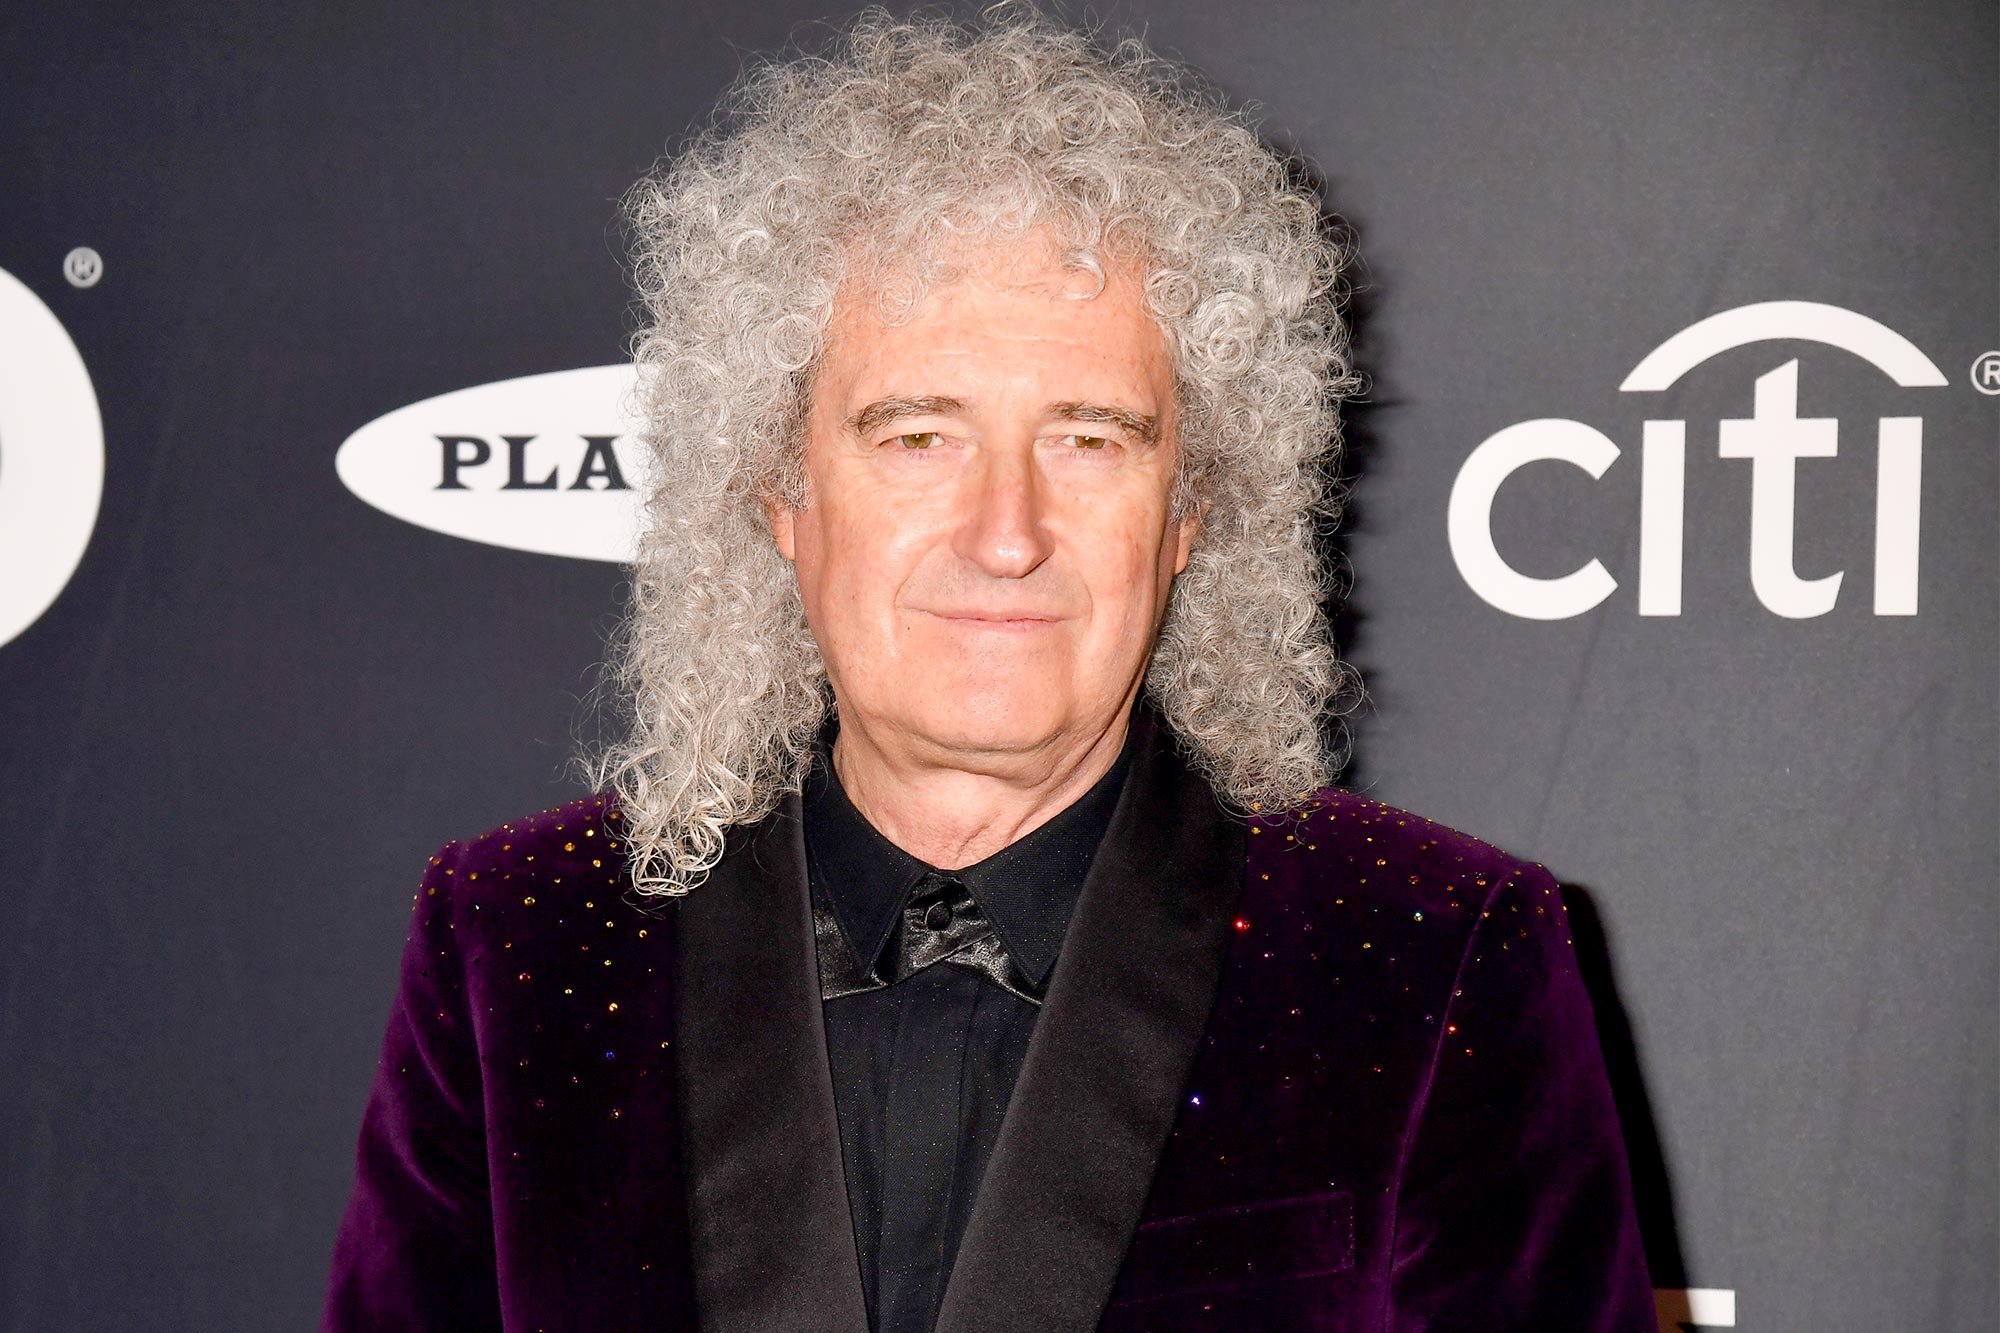 Brian May Queen guitarist helicopter landing on pitch Stopped Cricket match!